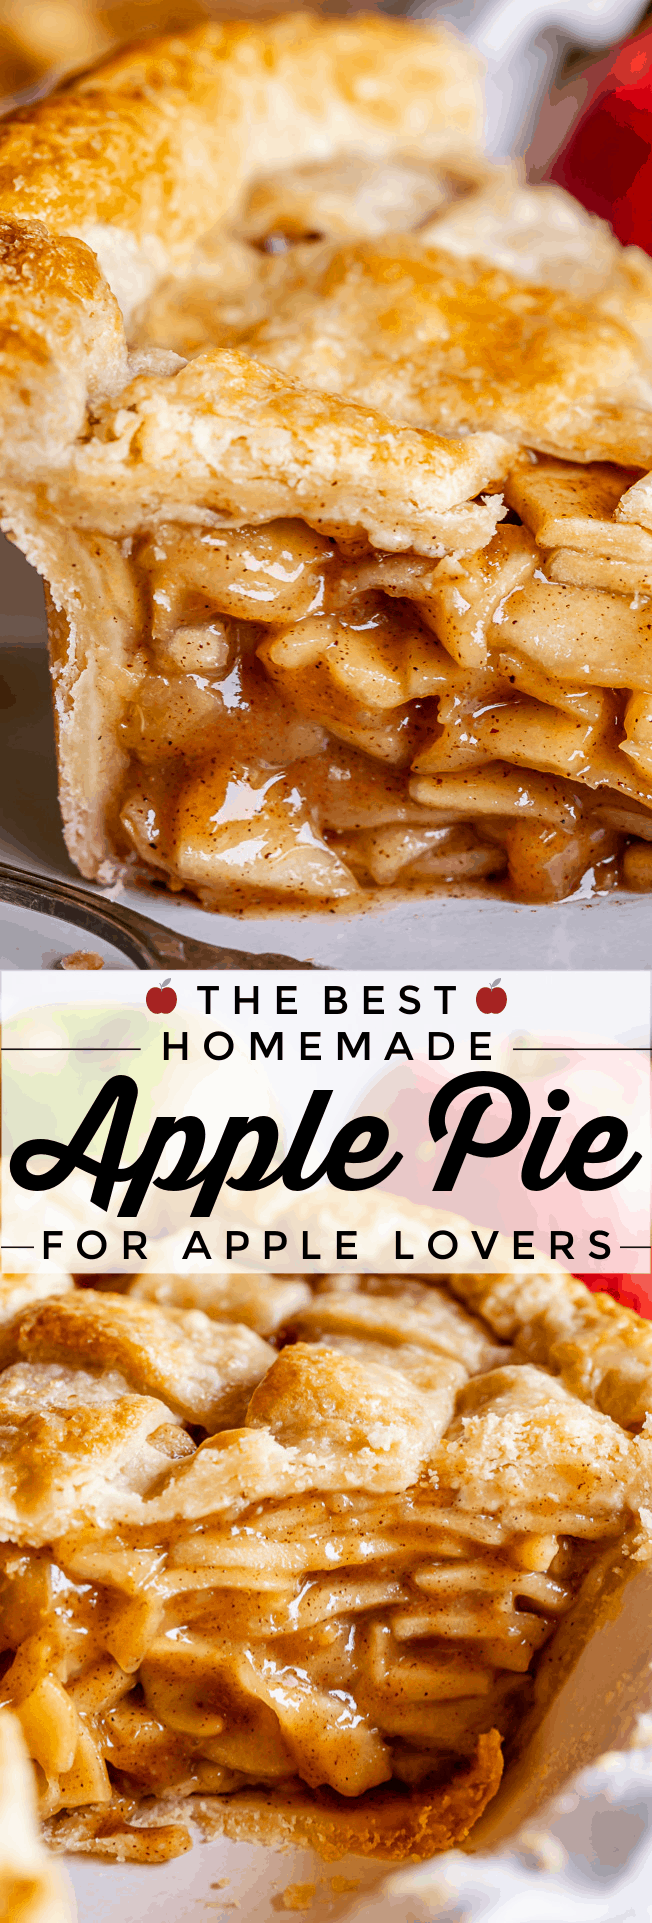 The Best Homemade Apple Pie from The Food Charlatan -   19 thanksgiving desserts pie apple ideas